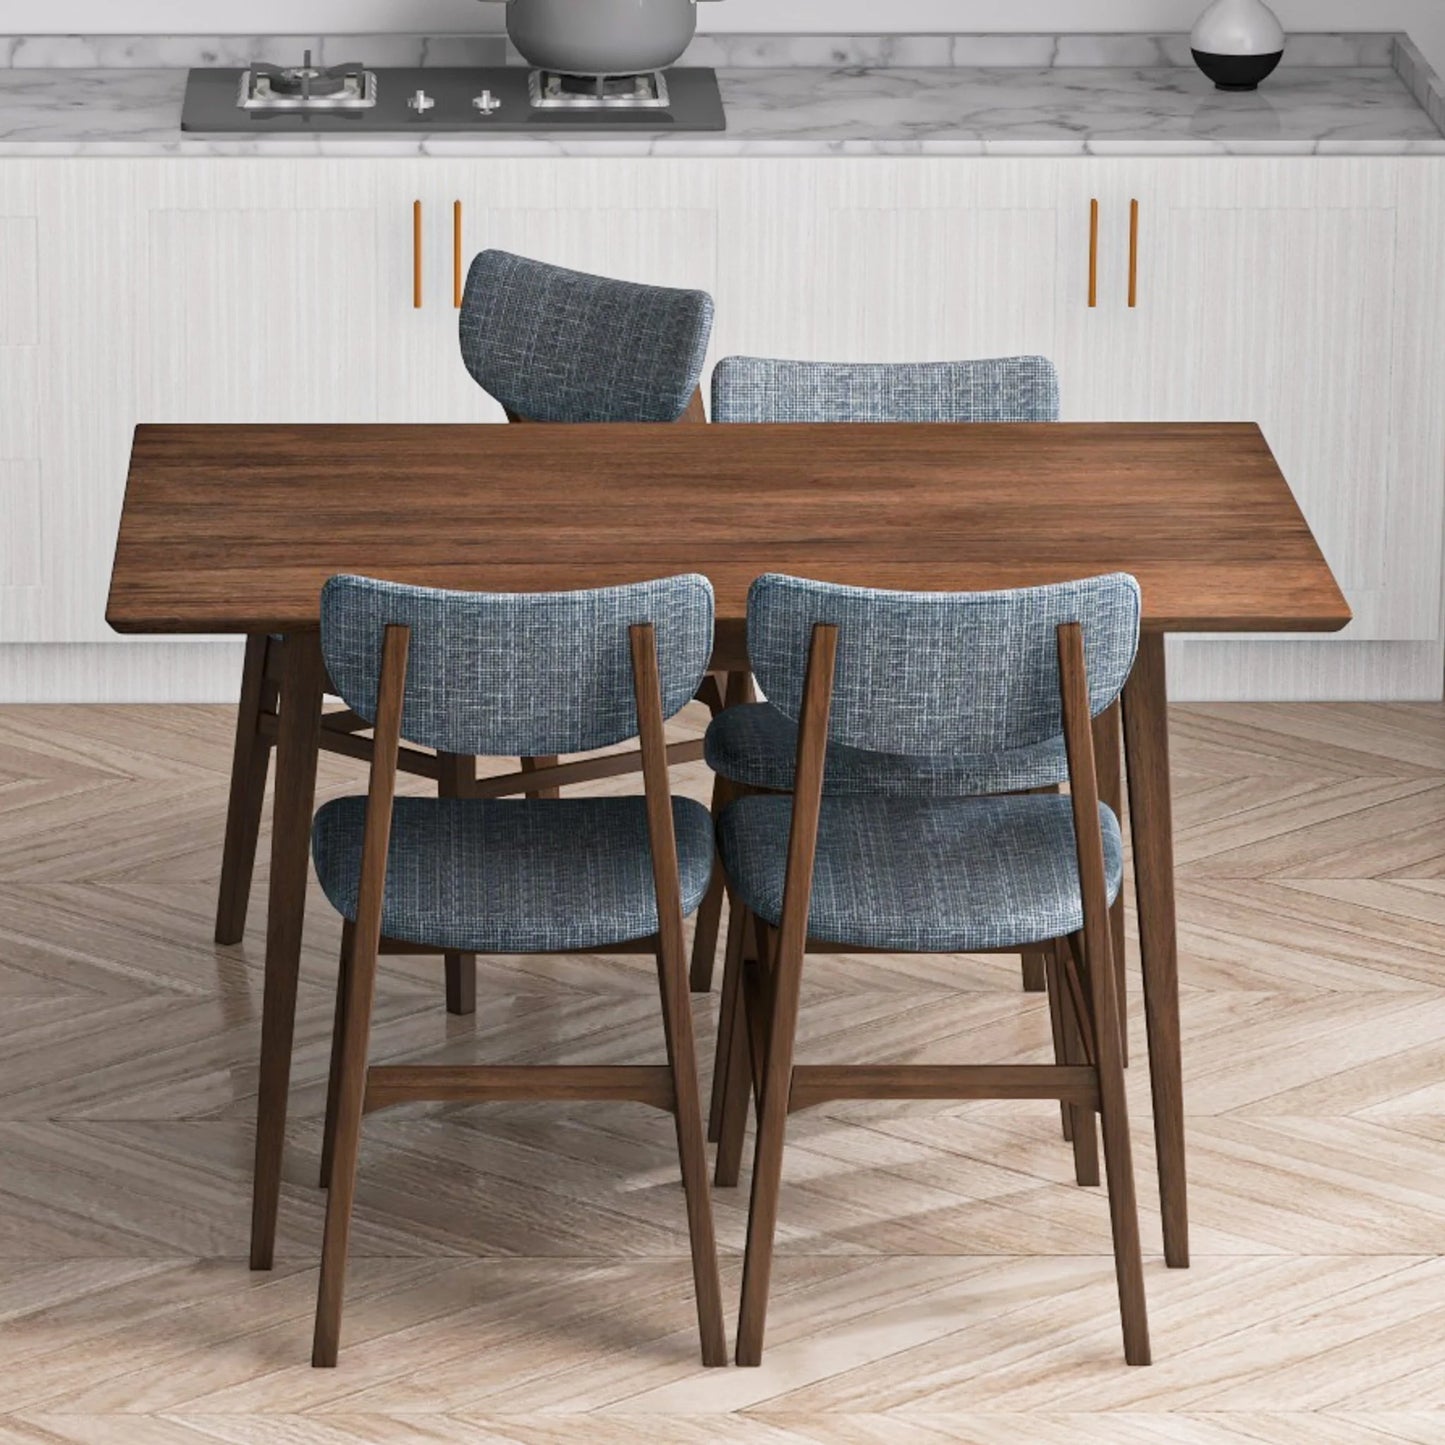 Adira (Small - Walnut) Dining Set with 4 Collins (Grey) Dining Chairs